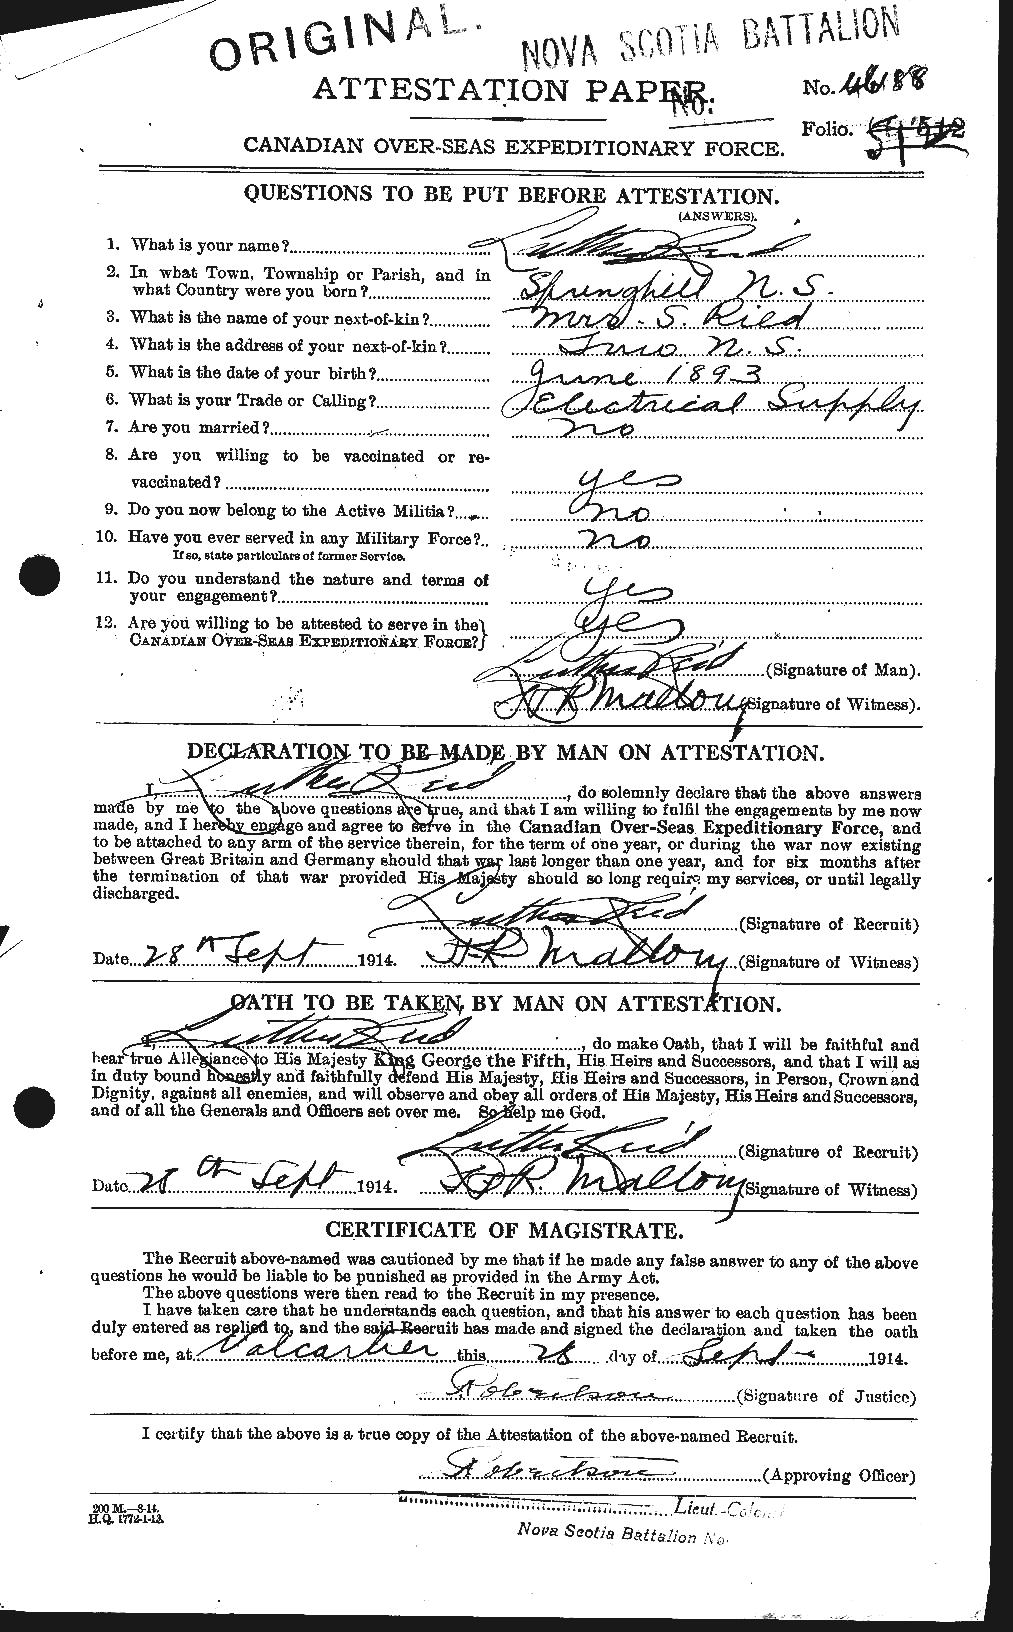 Personnel Records of the First World War - CEF 598934a